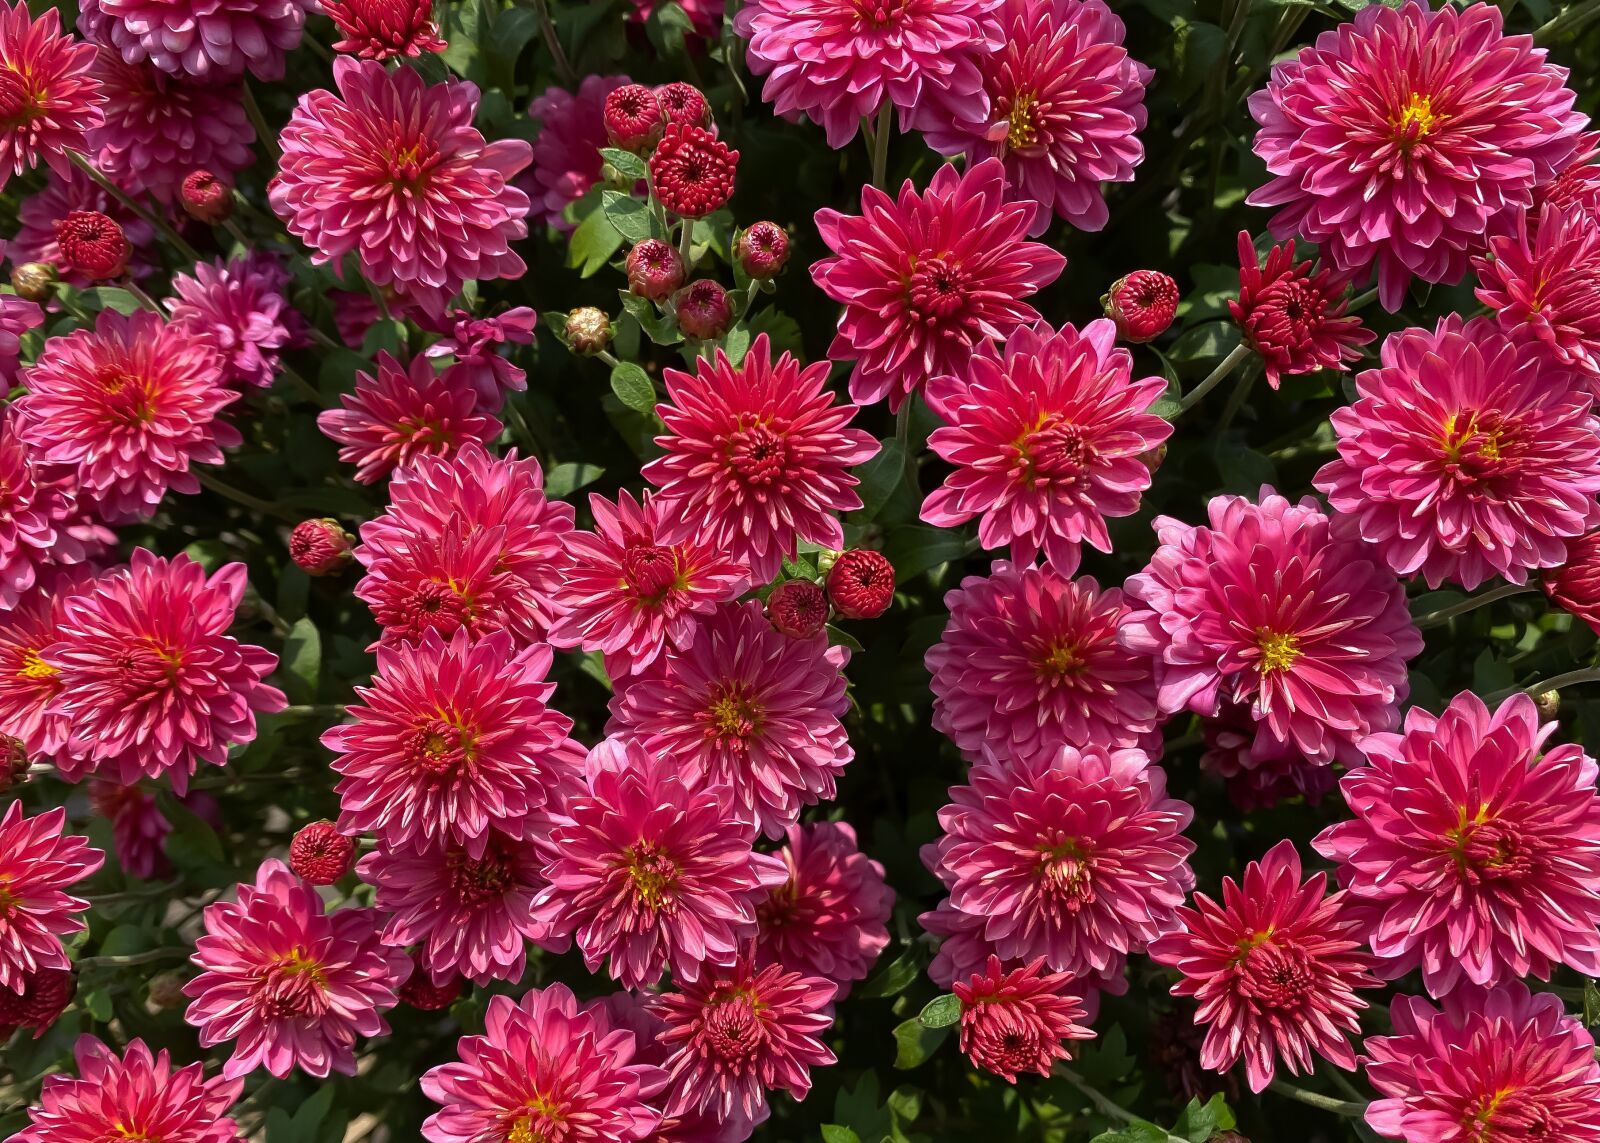 iPhone 11 Pro back triple camera 4.25mm f/1.8 sample photo. Mums, flowers, fall photography